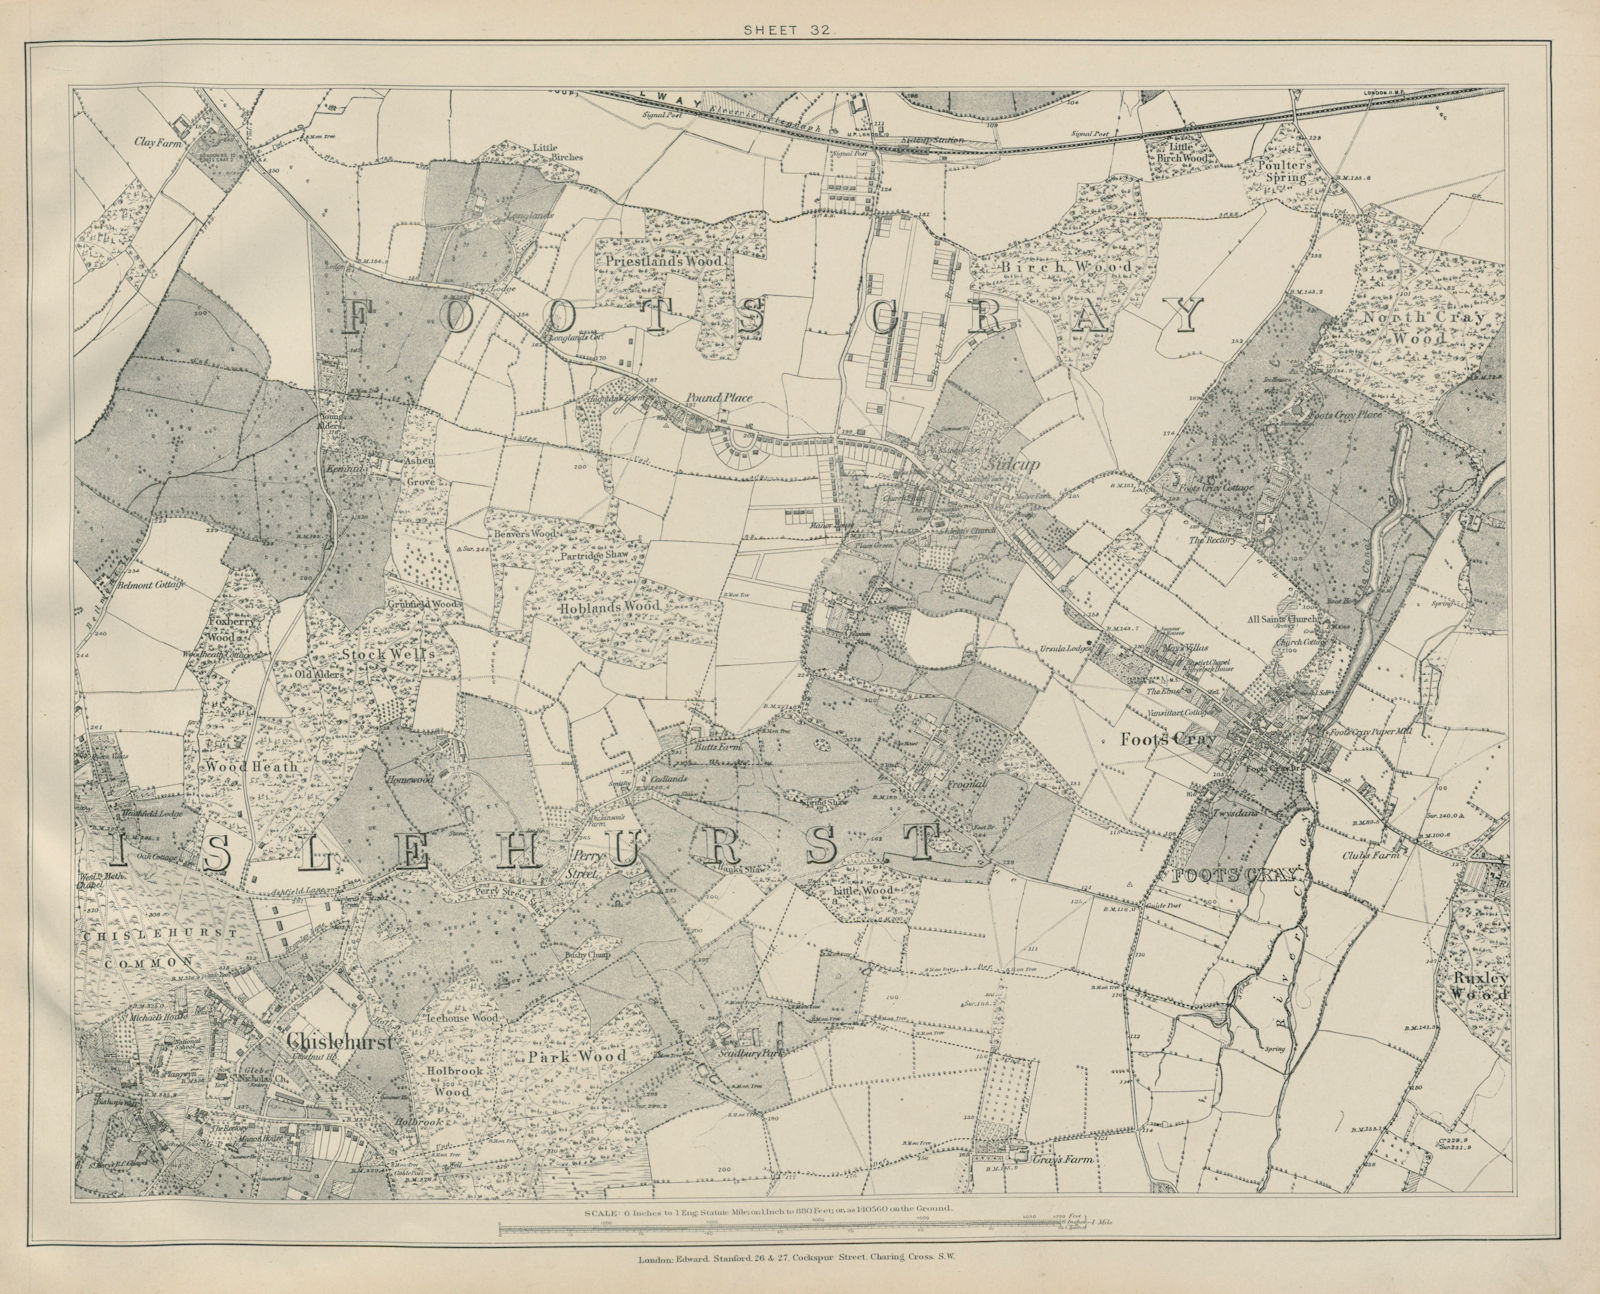 Associate Product Stanford Library map of London Sheet 32 Chislehurst Foots Cray Sidcup 1895